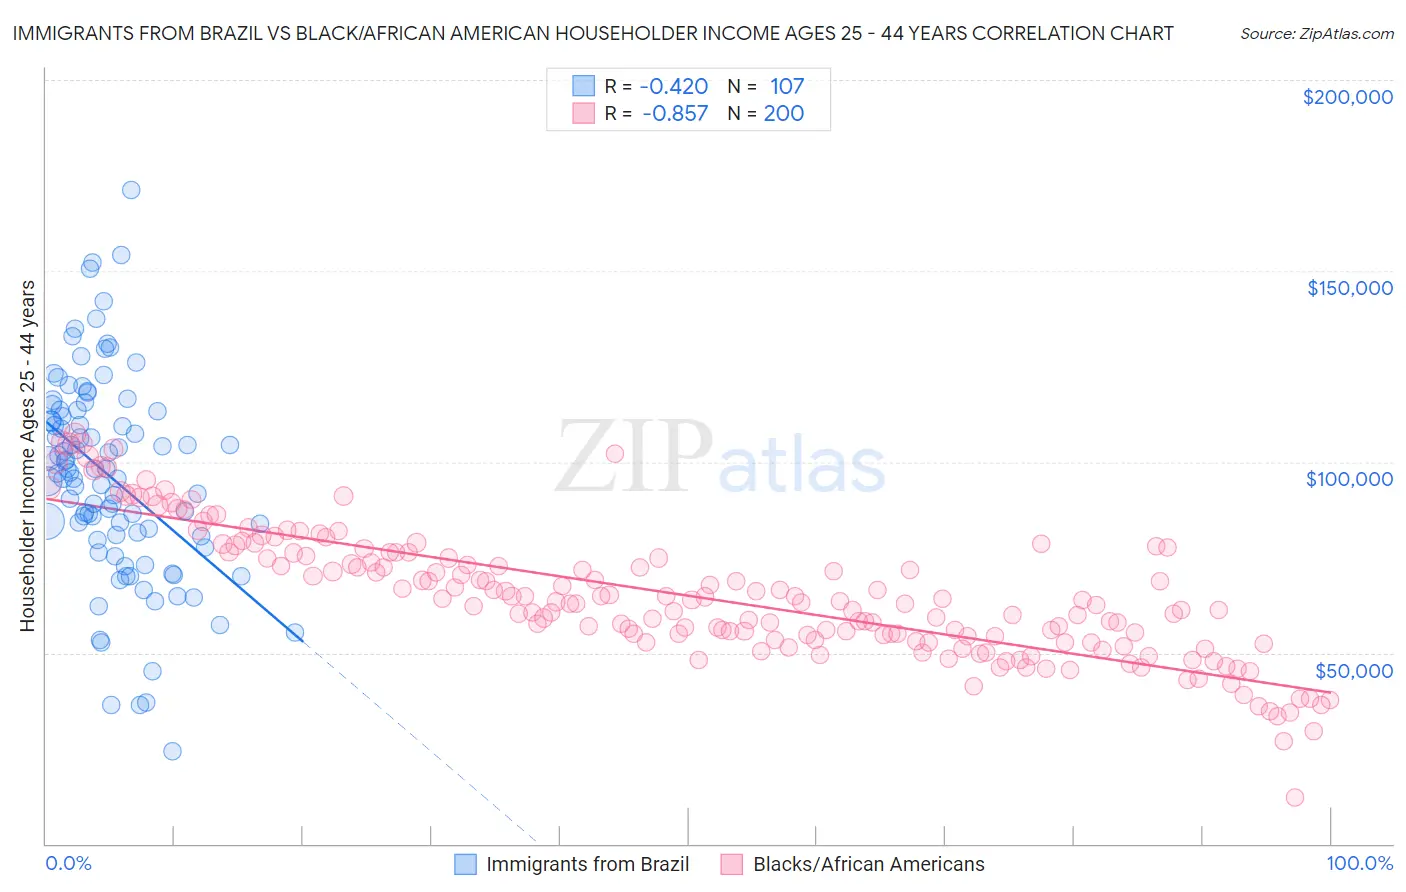 Immigrants from Brazil vs Black/African American Householder Income Ages 25 - 44 years